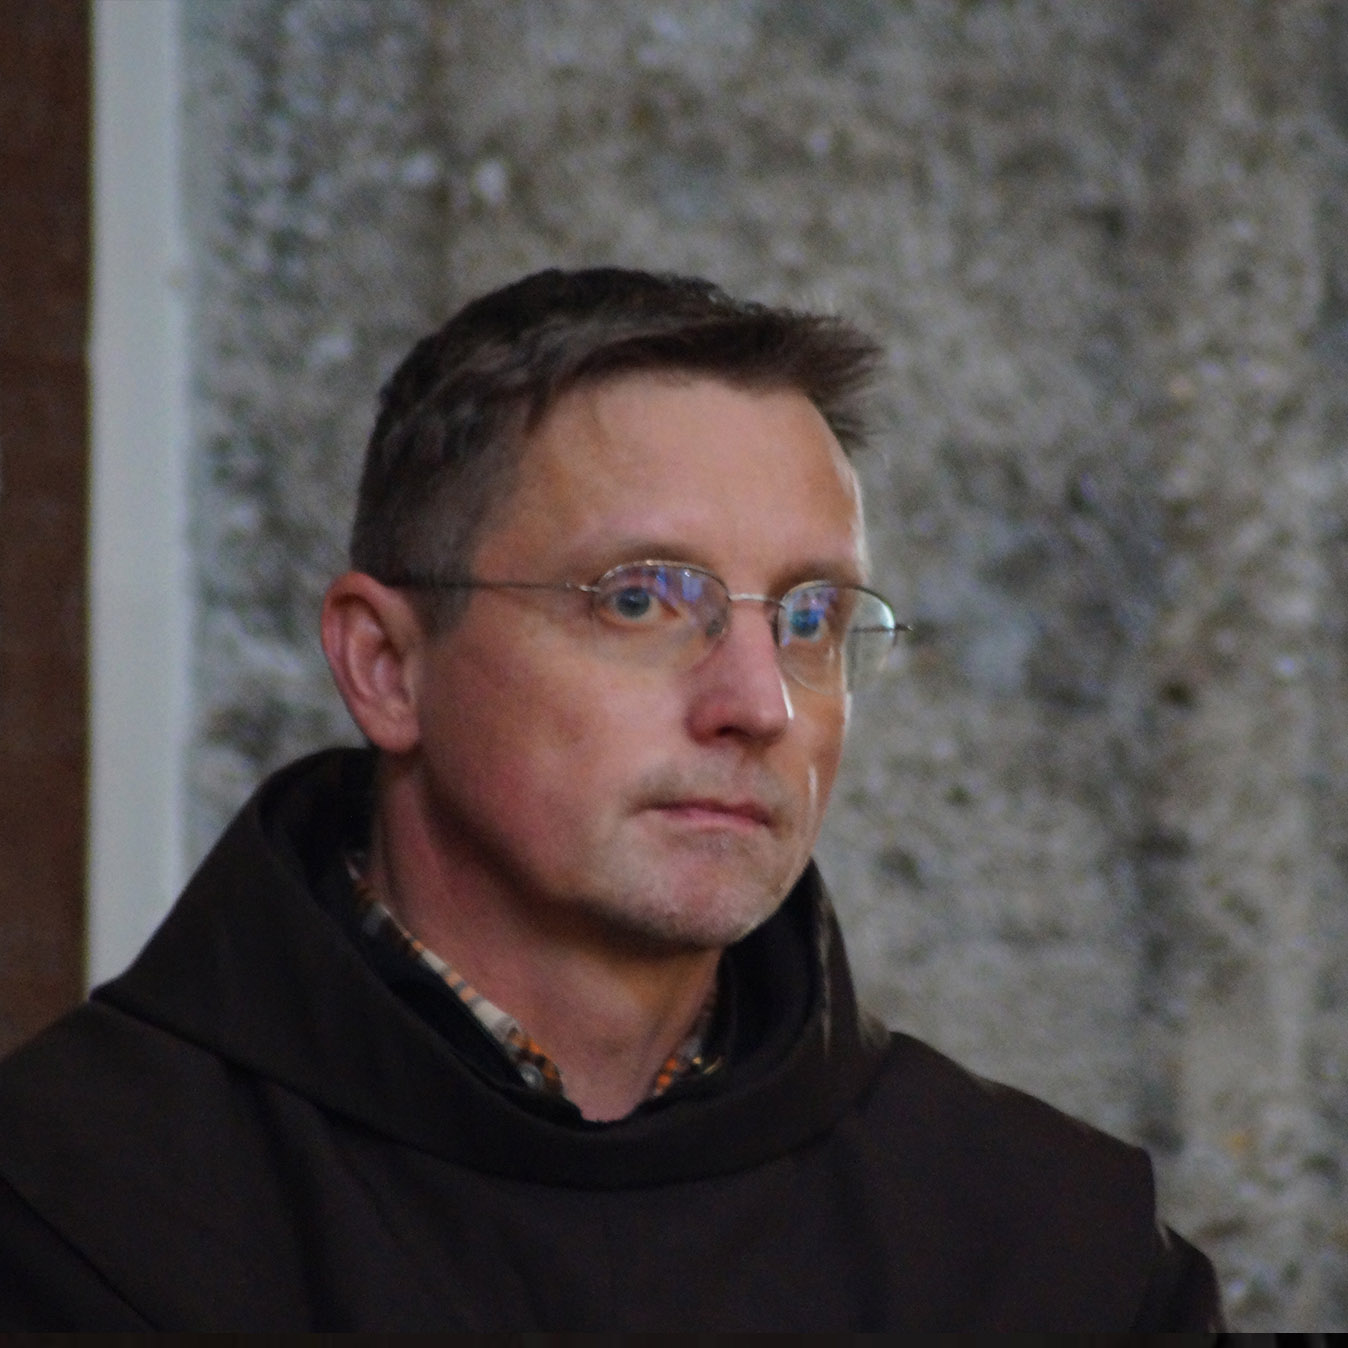 Br. Pascal M. Hollaus OFM